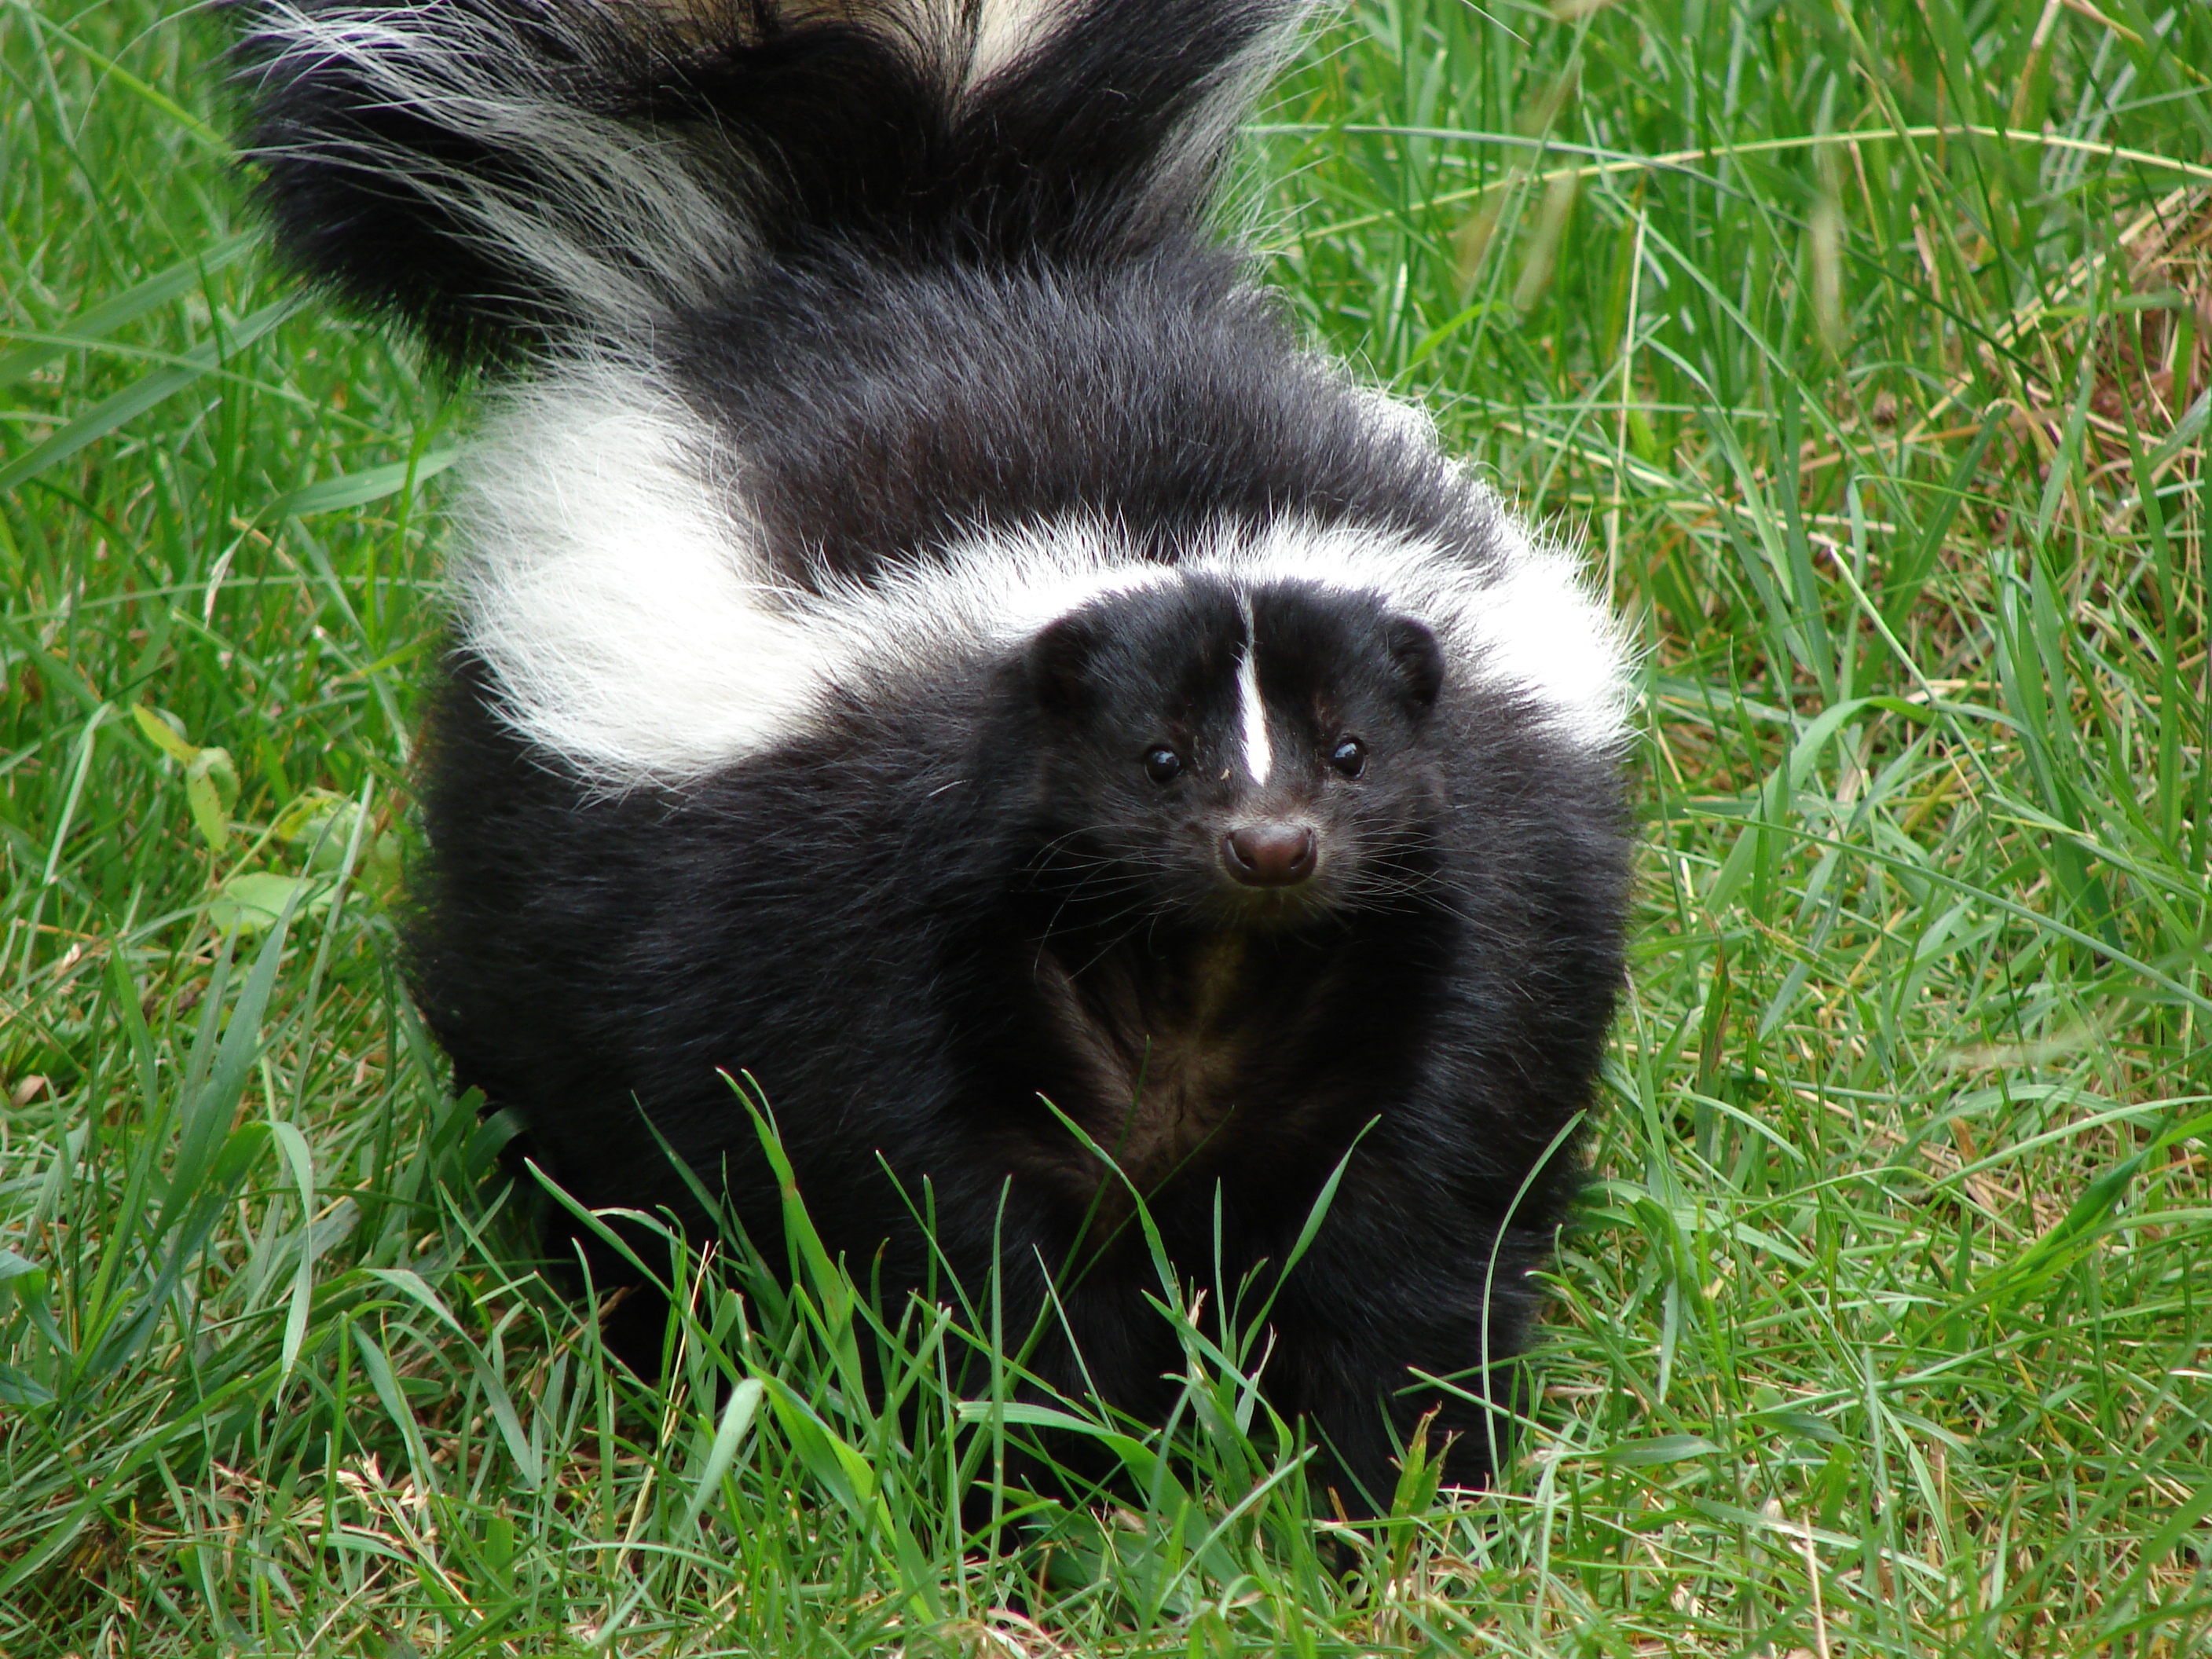 skunks are NOT cute